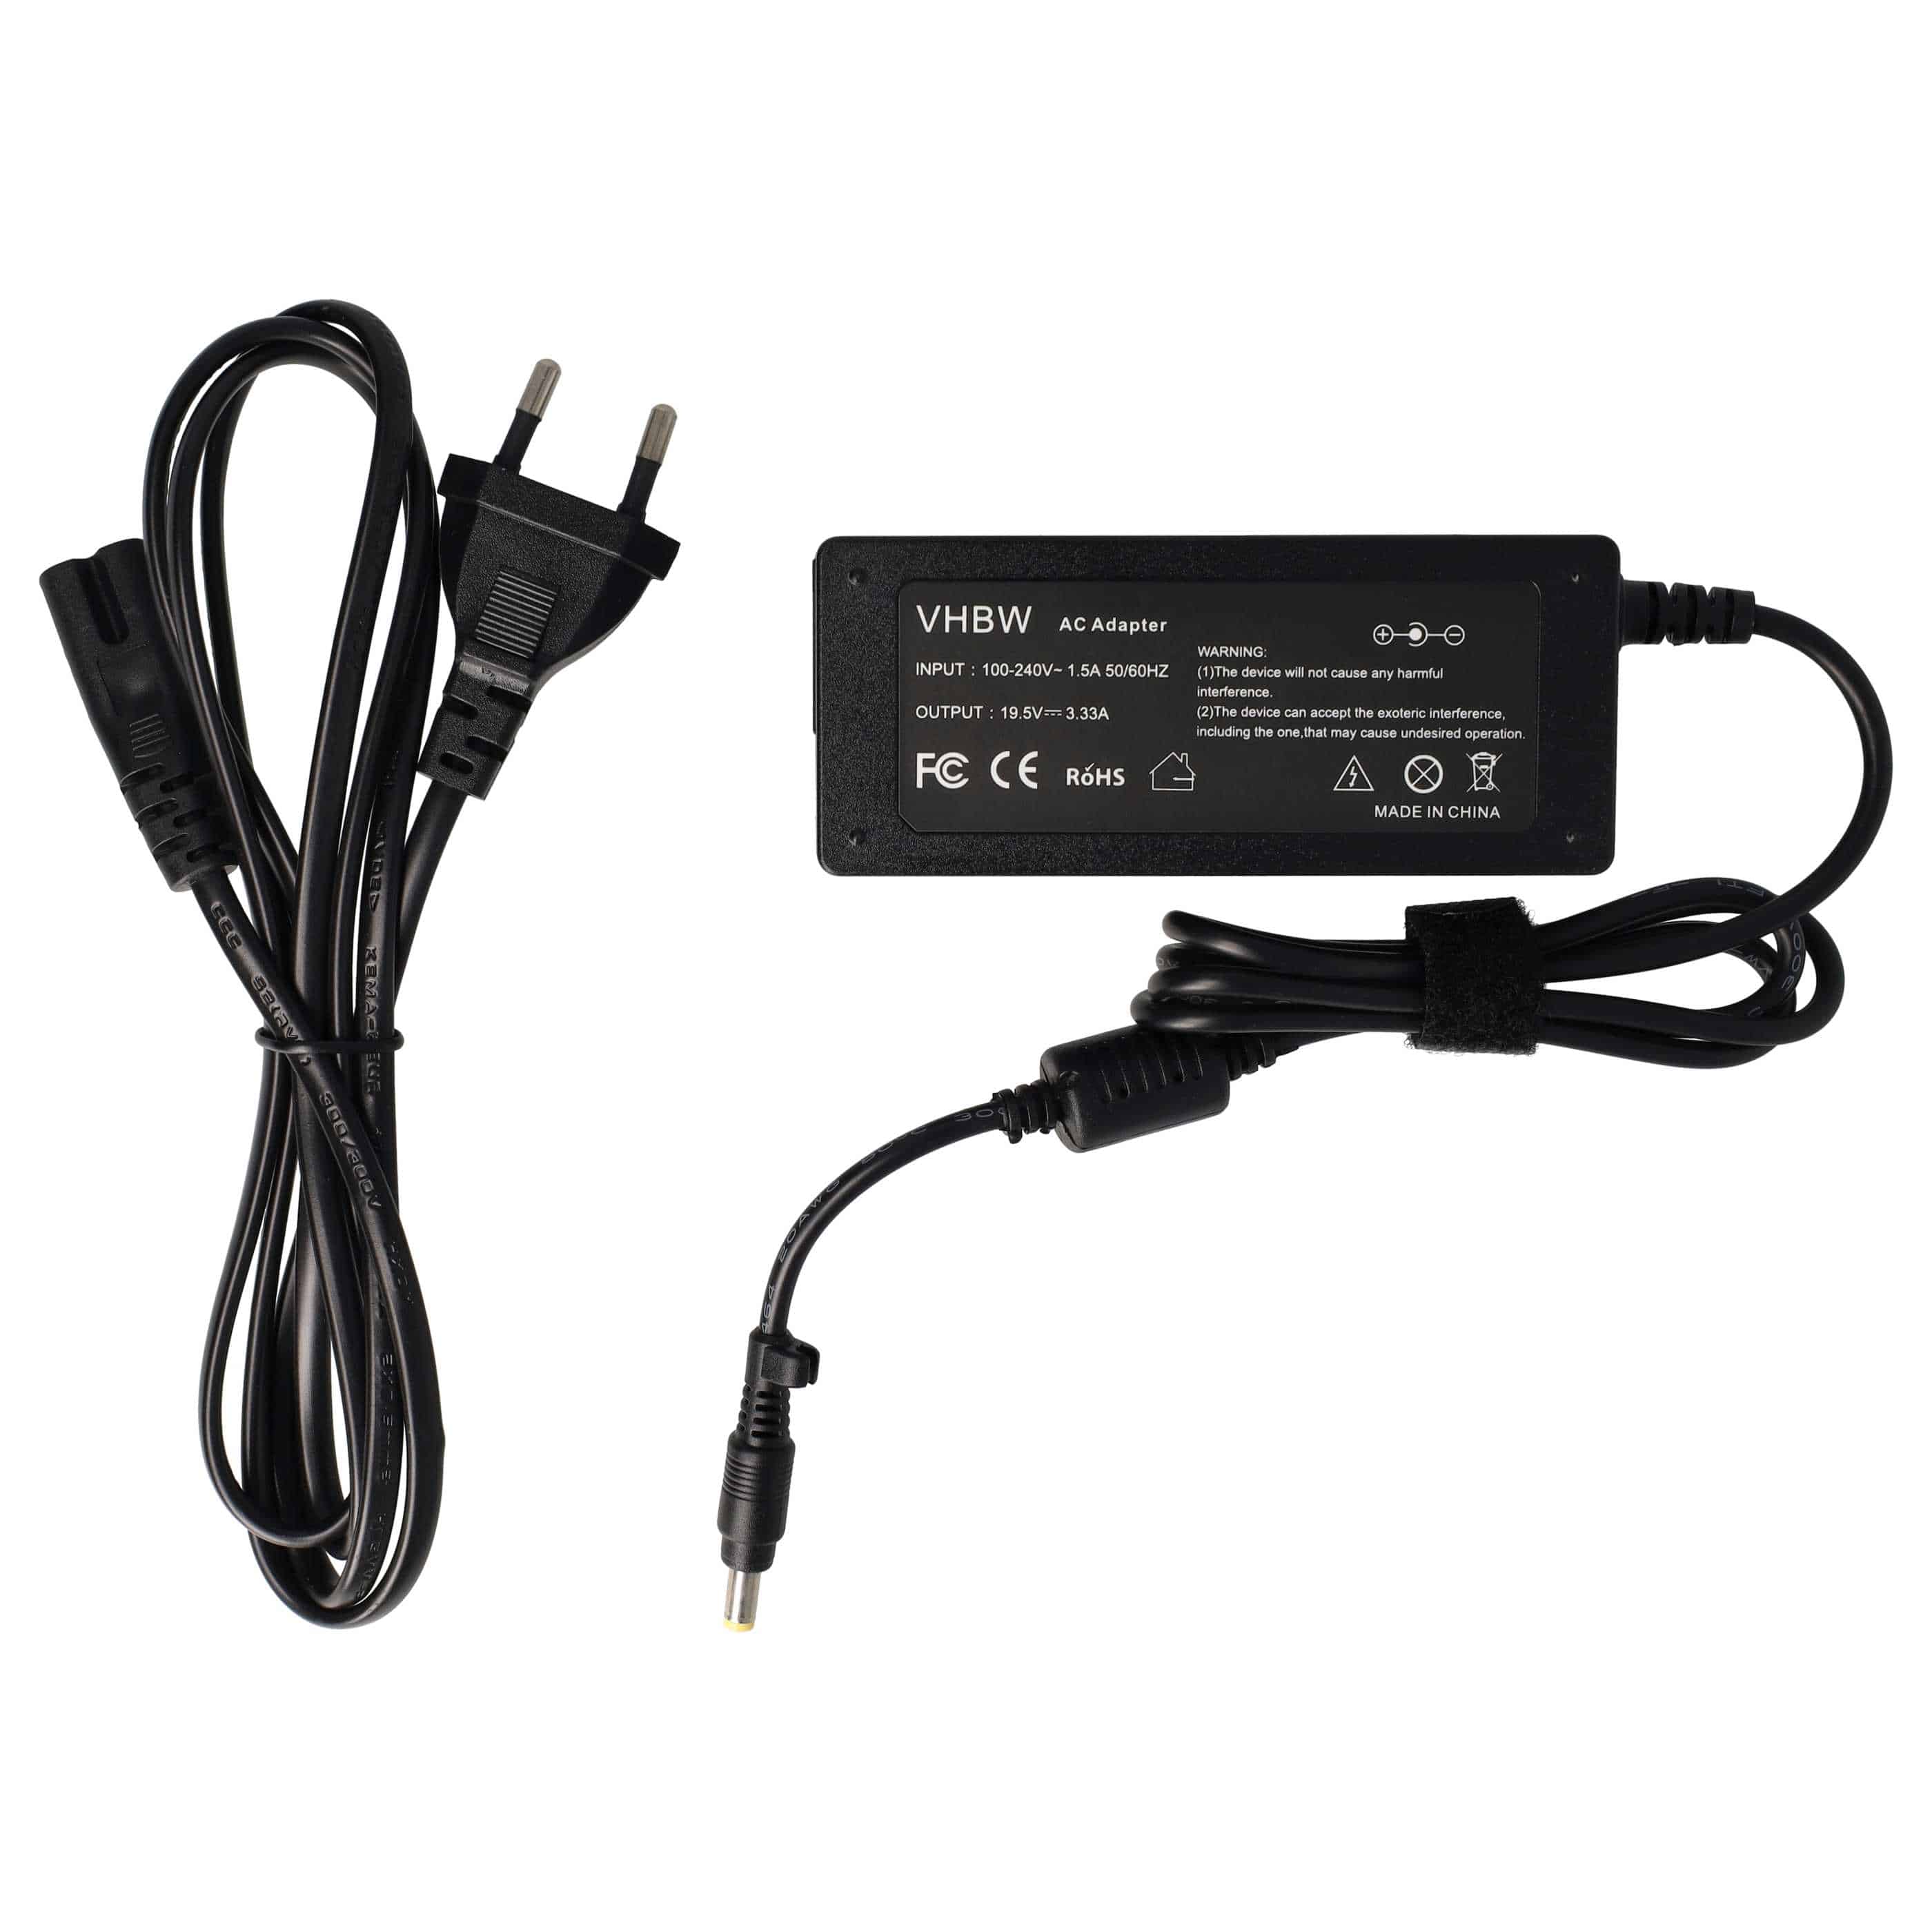 Mains Power Adapter replaces HP 693715-001, 677770-003, 67770-002, 613149-003, 613149-001 for HPNotebook, 65 W